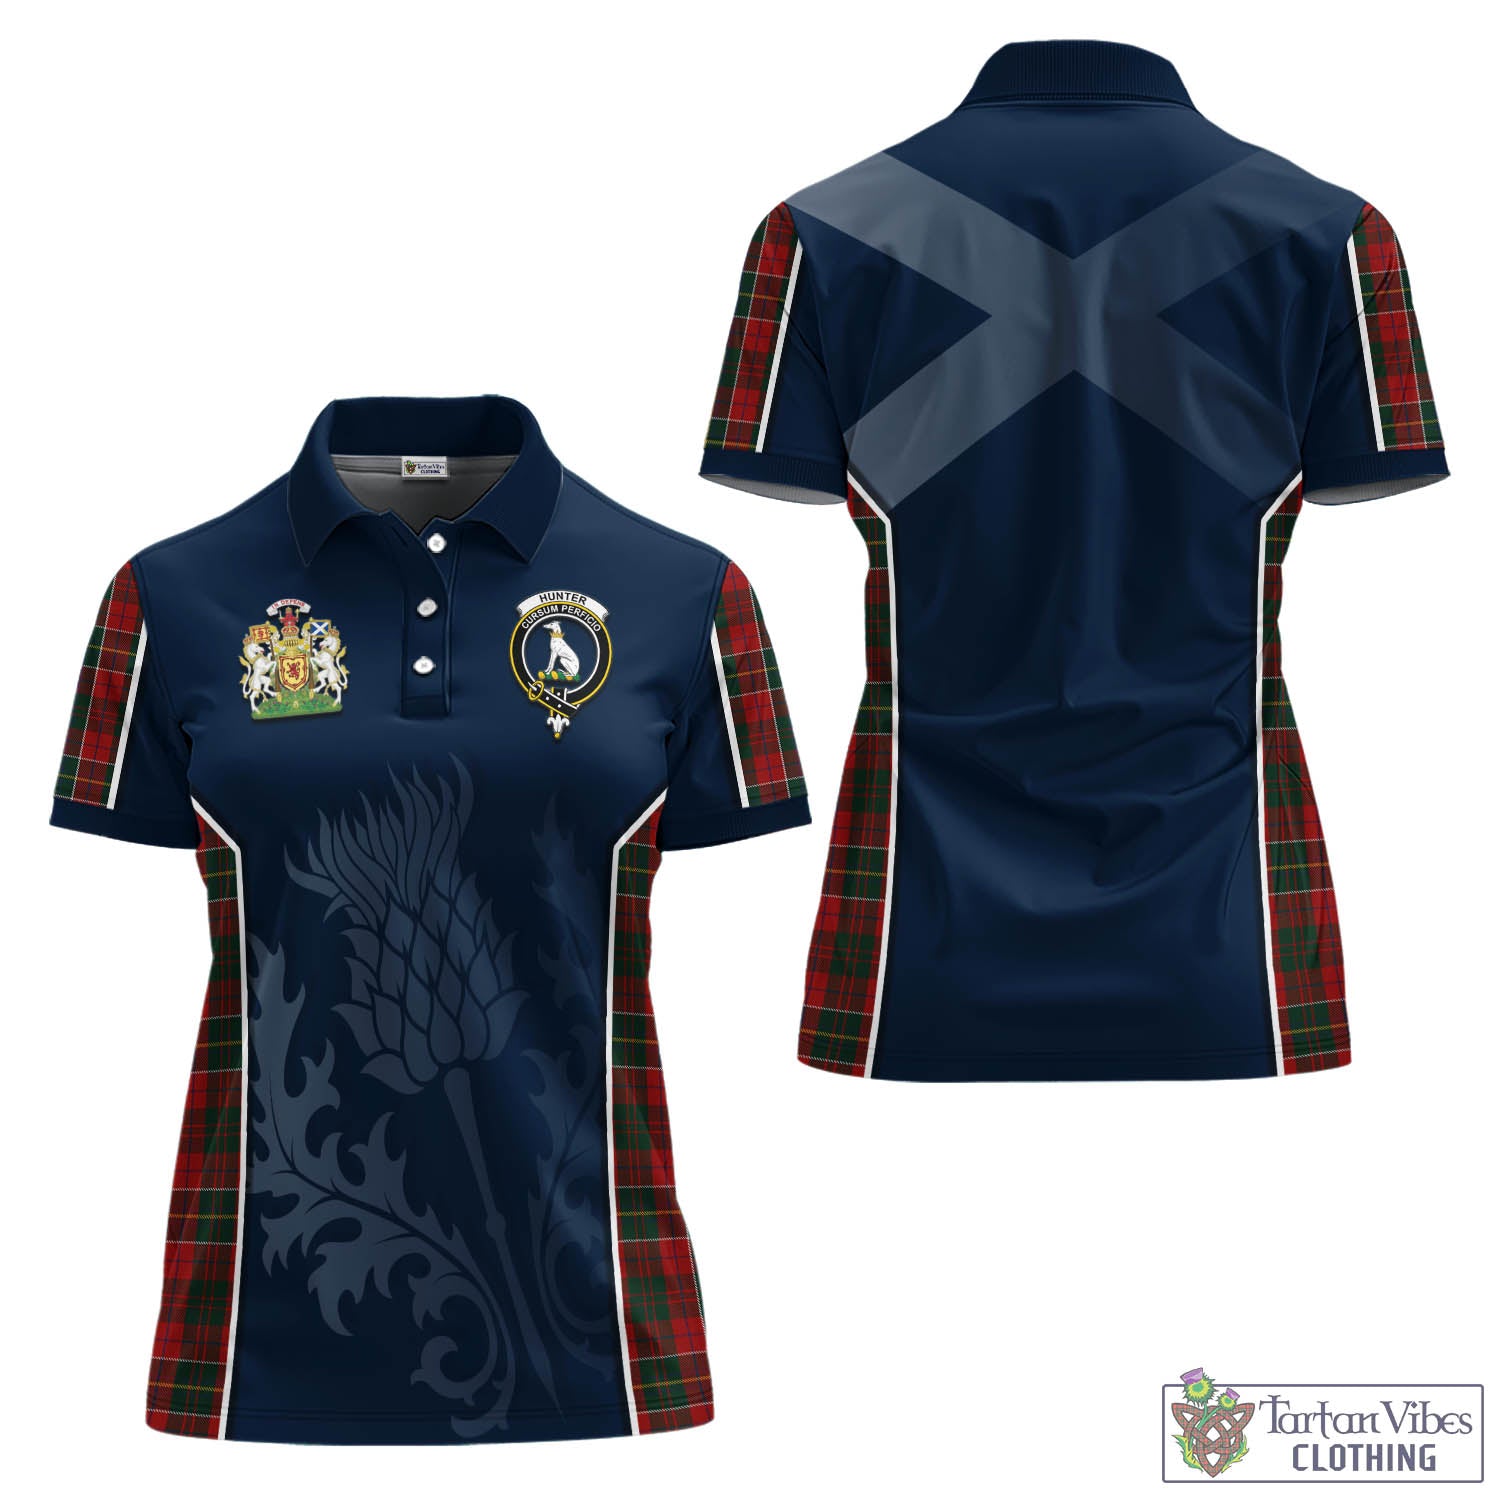 Tartan Vibes Clothing Hunter USA Tartan Women's Polo Shirt with Family Crest and Scottish Thistle Vibes Sport Style